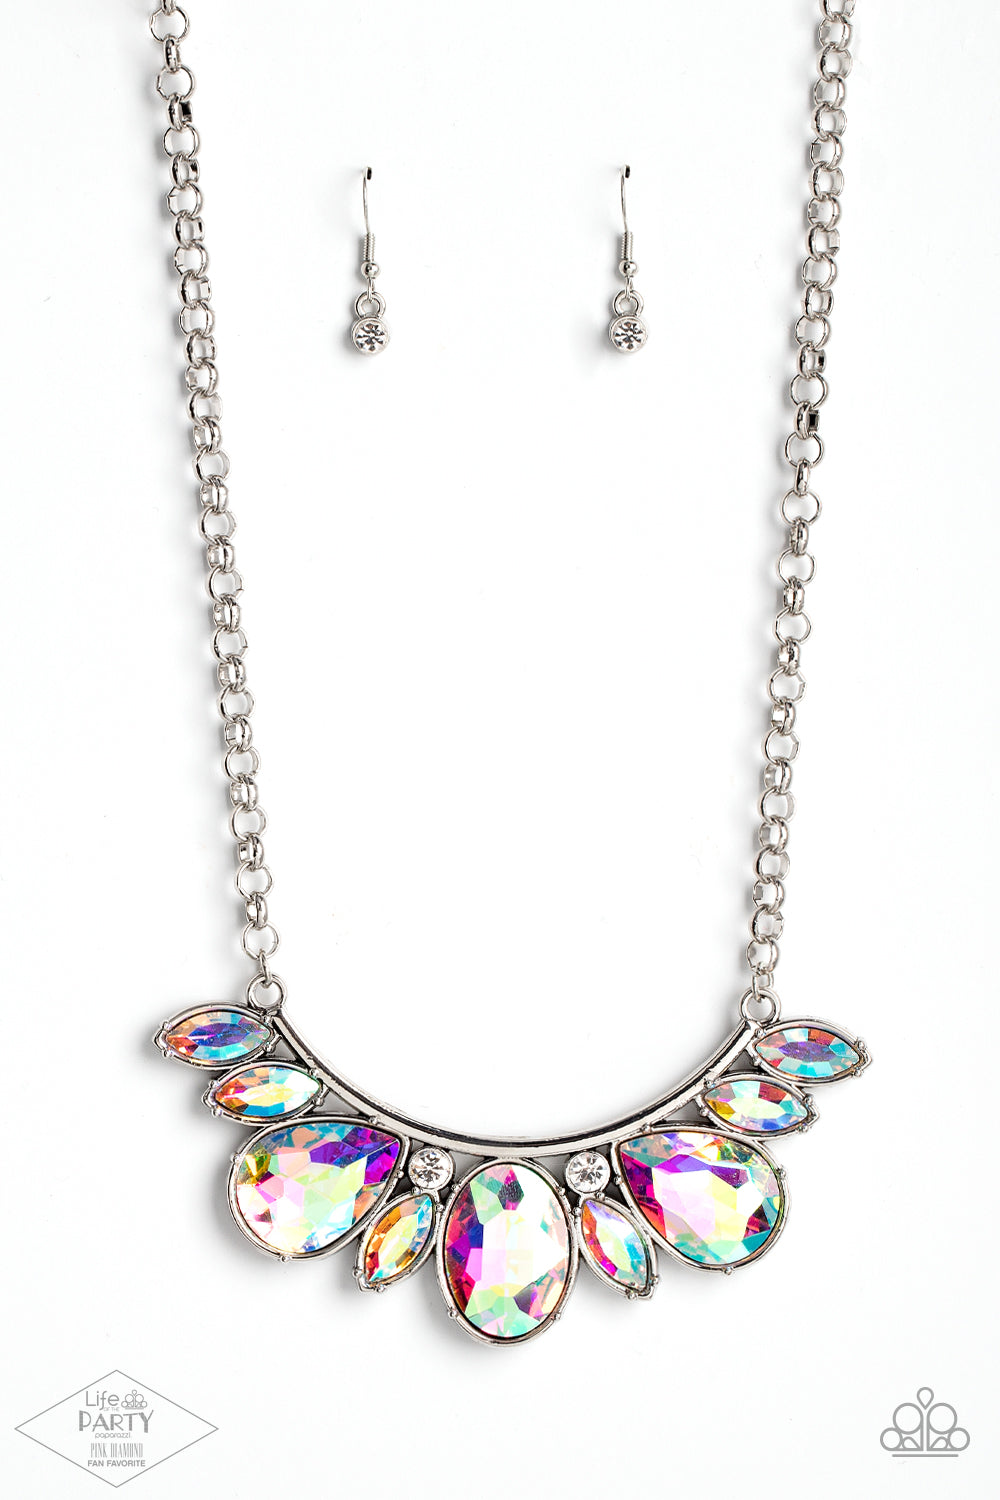 Paparazzi Never Slay Never - Iridescent Multi Necklaces infused with a pair of glassy white rhinestones, an oversized collection of marquise and teardrop iridescent rhinestones drips from the bottom of a bowing silver bar, coalescing into a sassy statement piece below the collar. Features an adjustable clasp closure.  Sold as one individual necklace. Includes one pair of matching earrings.  Life of the Party 